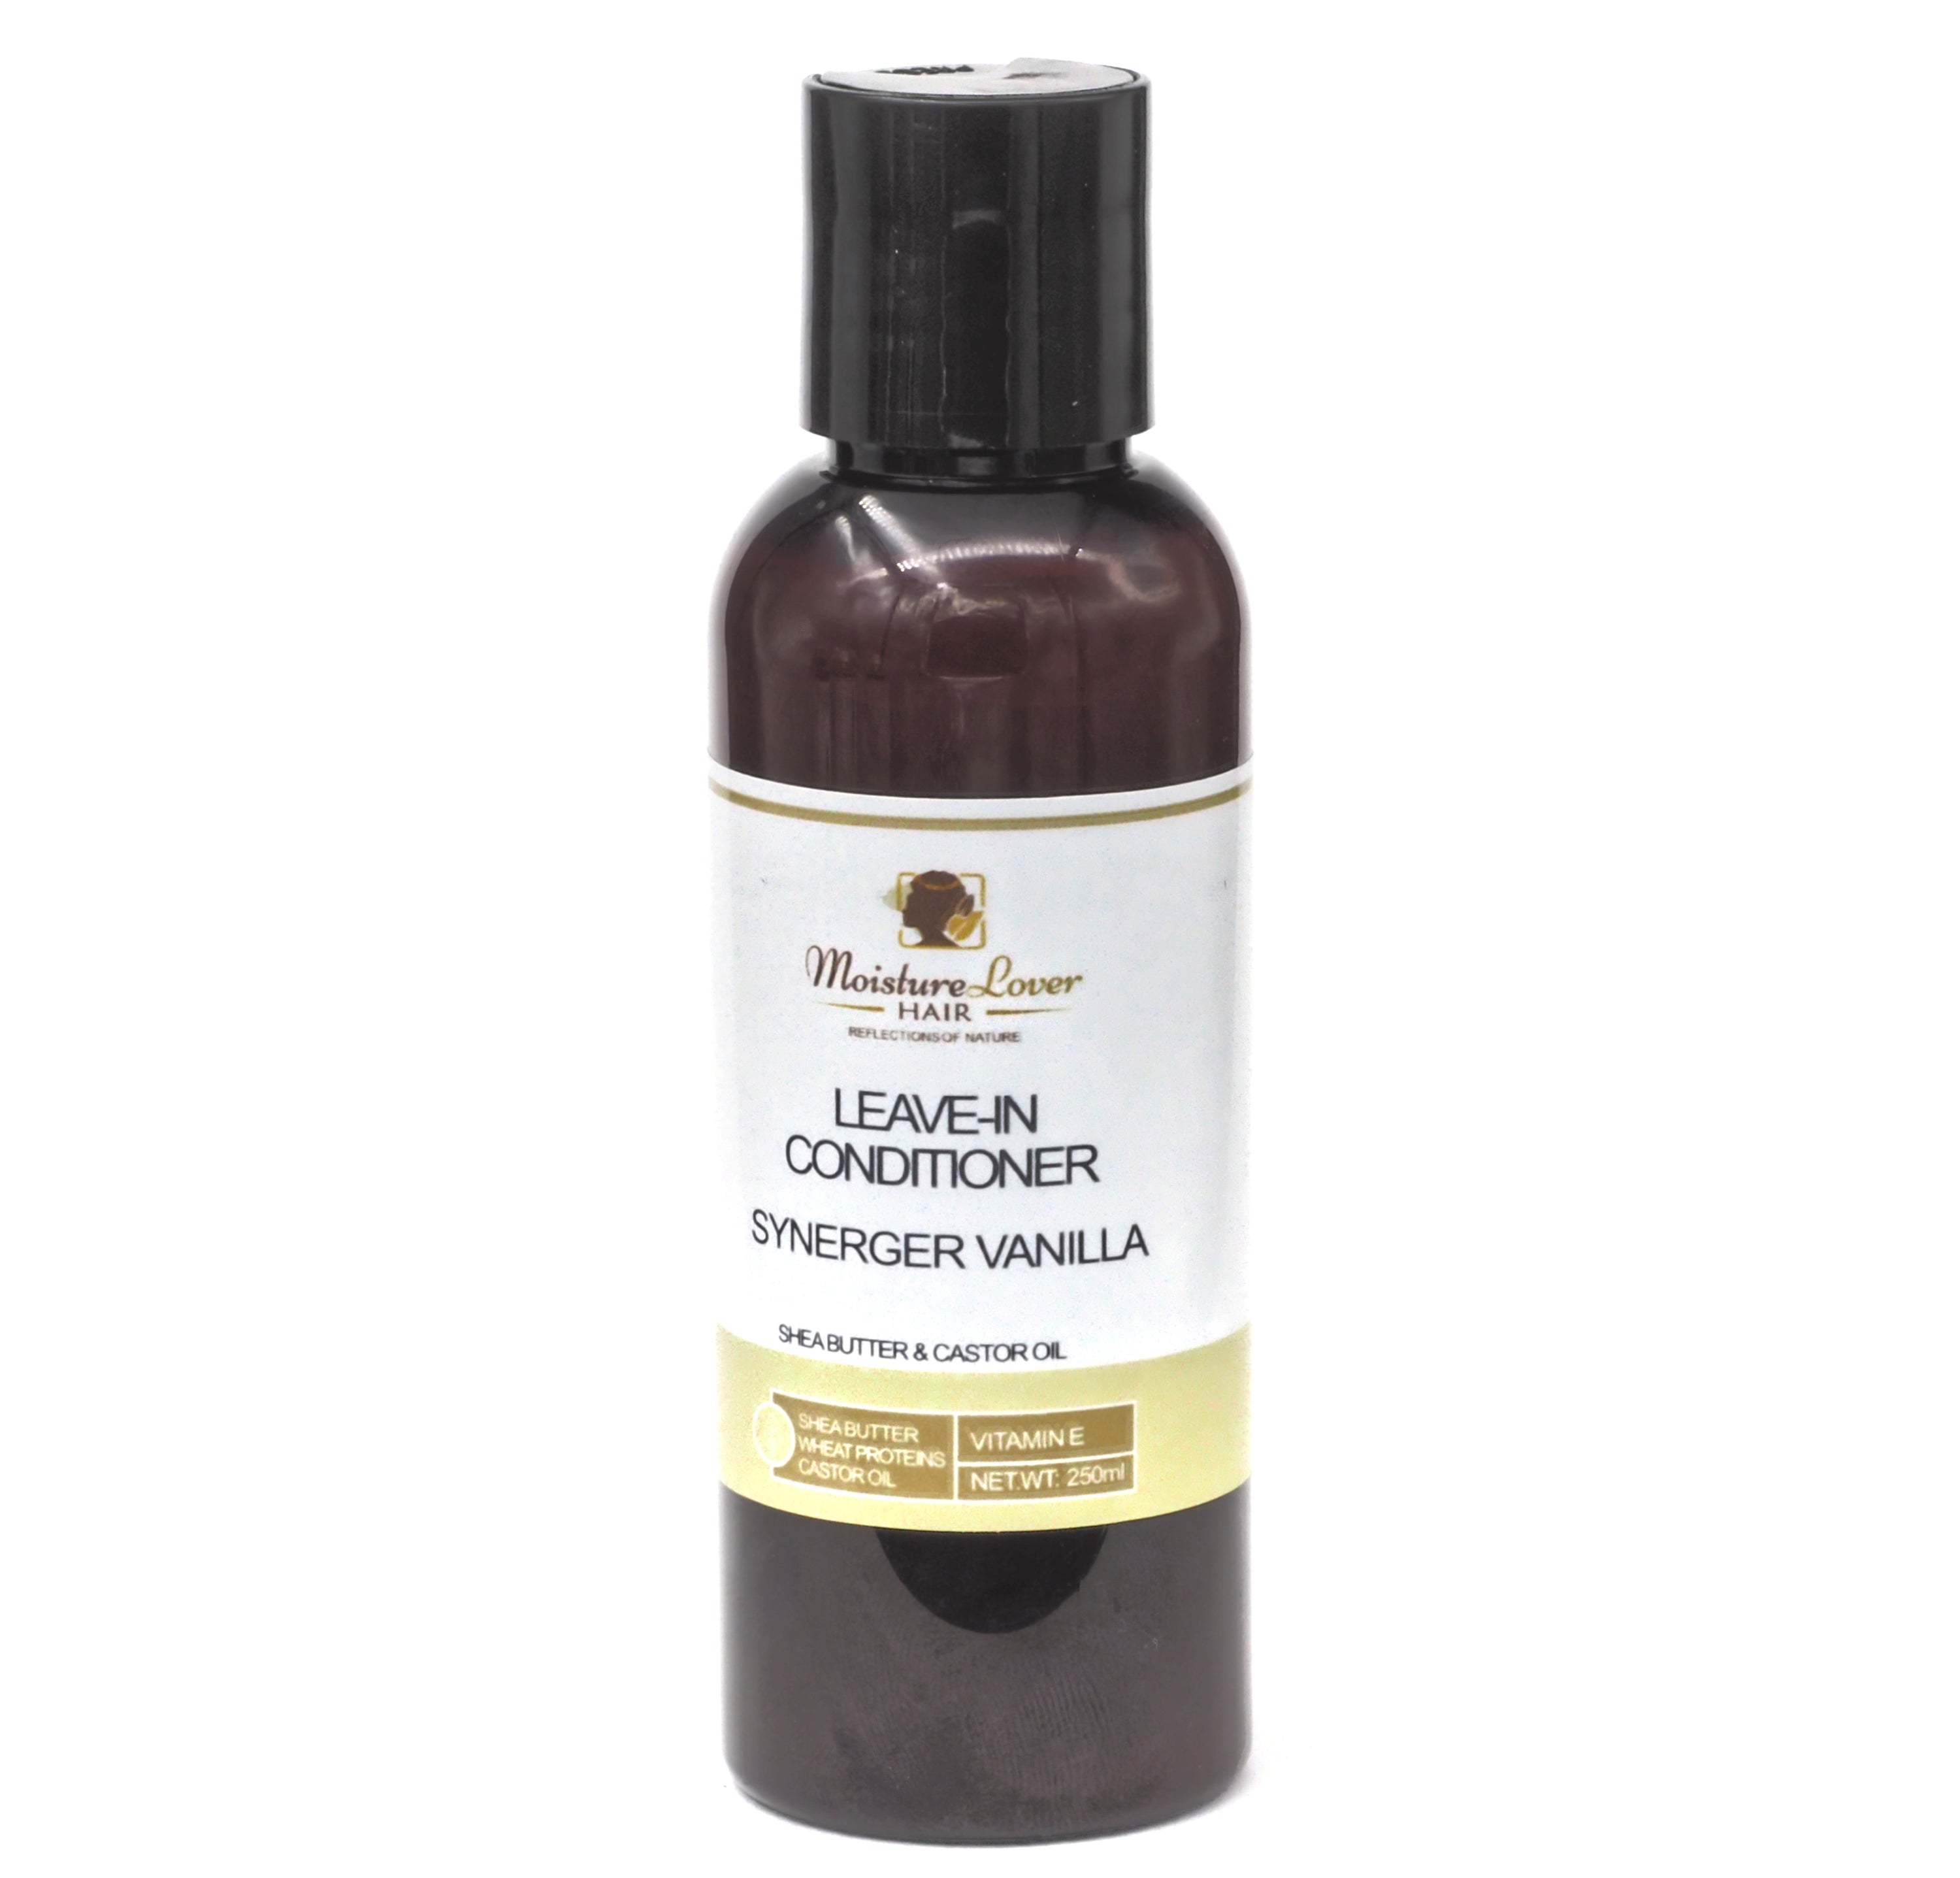 Conditioner is rich in moisturising Shea Butter, Castor Oil and Hydrolyzed Wheat Protein to help nourish, strengthen and repair dry and damaged hair - MoistureLover Hair - 